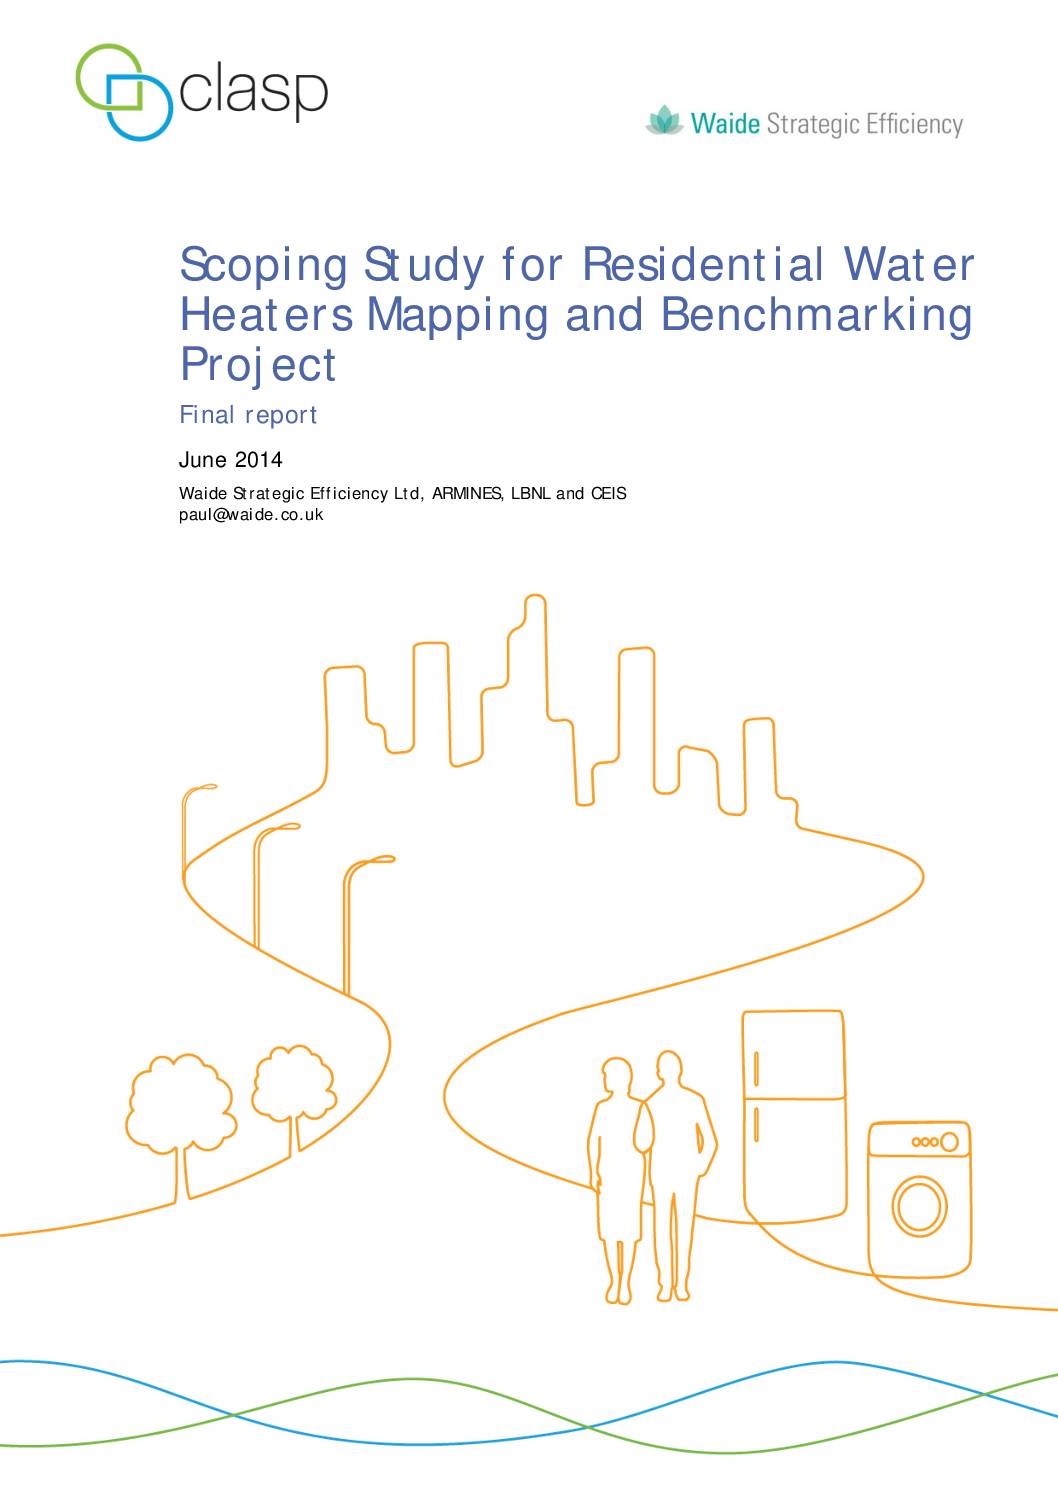 Scoping Study for Residential Water Heaters Mapping and Benchmarking Project